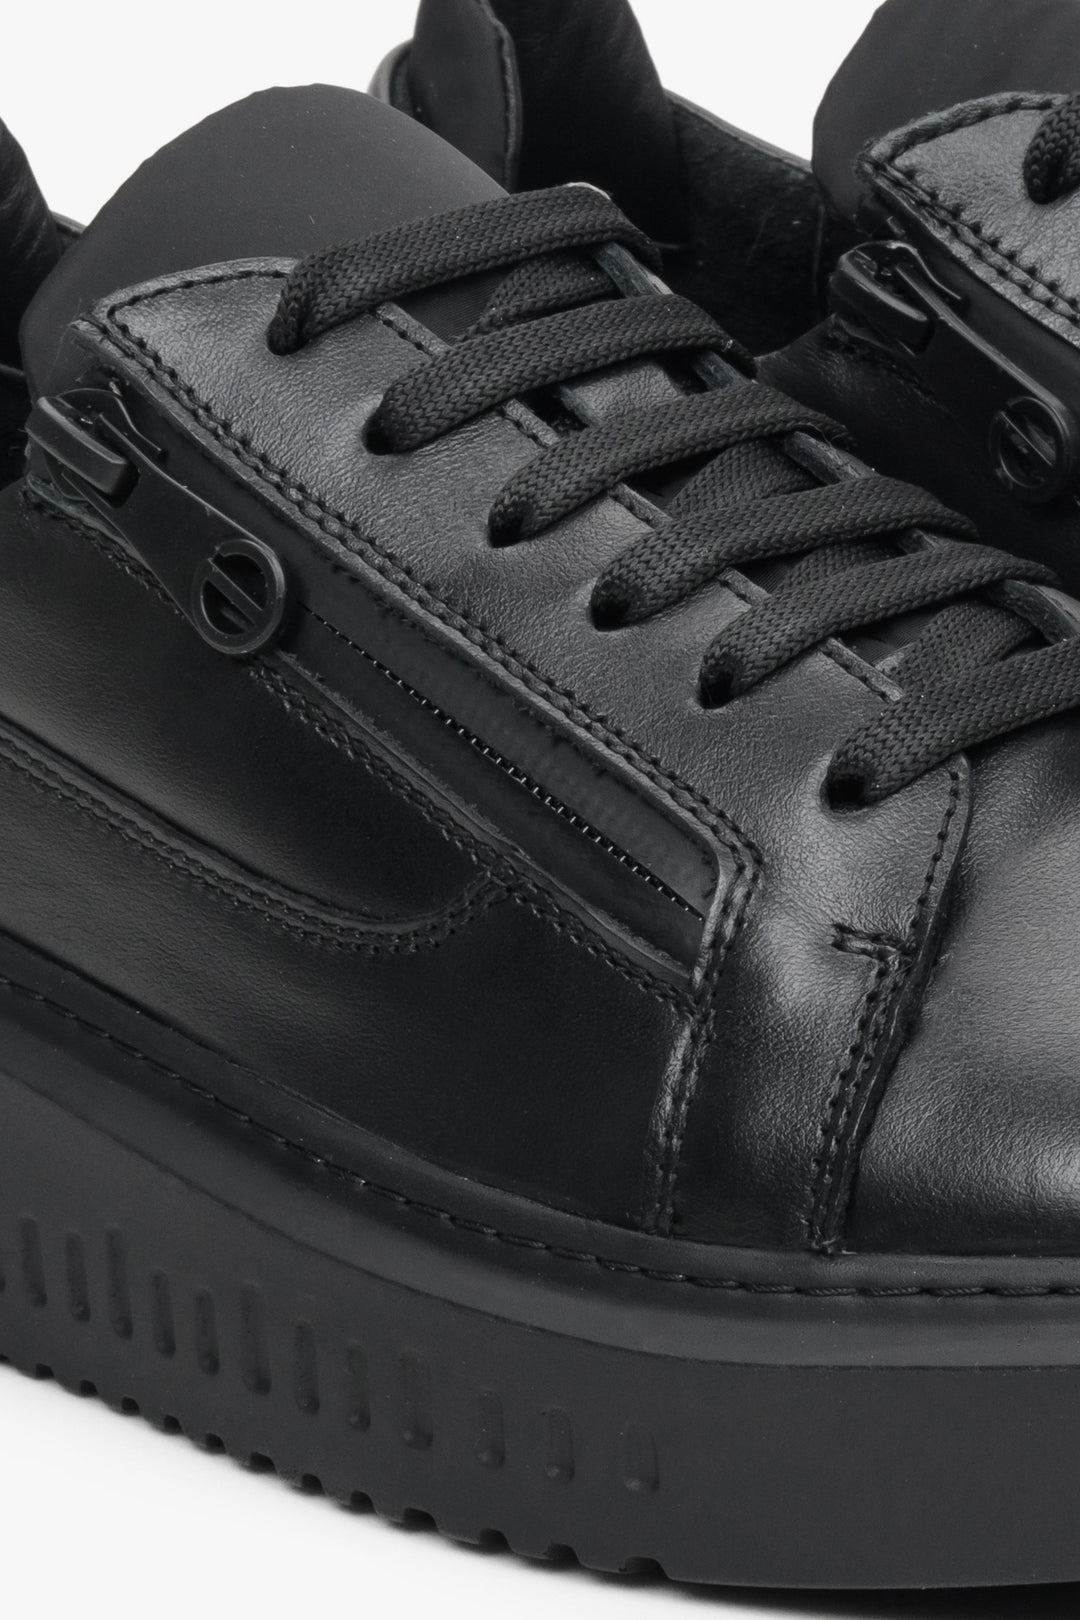 Leather, women's black sneakers by Estro with a flexible sole - close-up of the details.